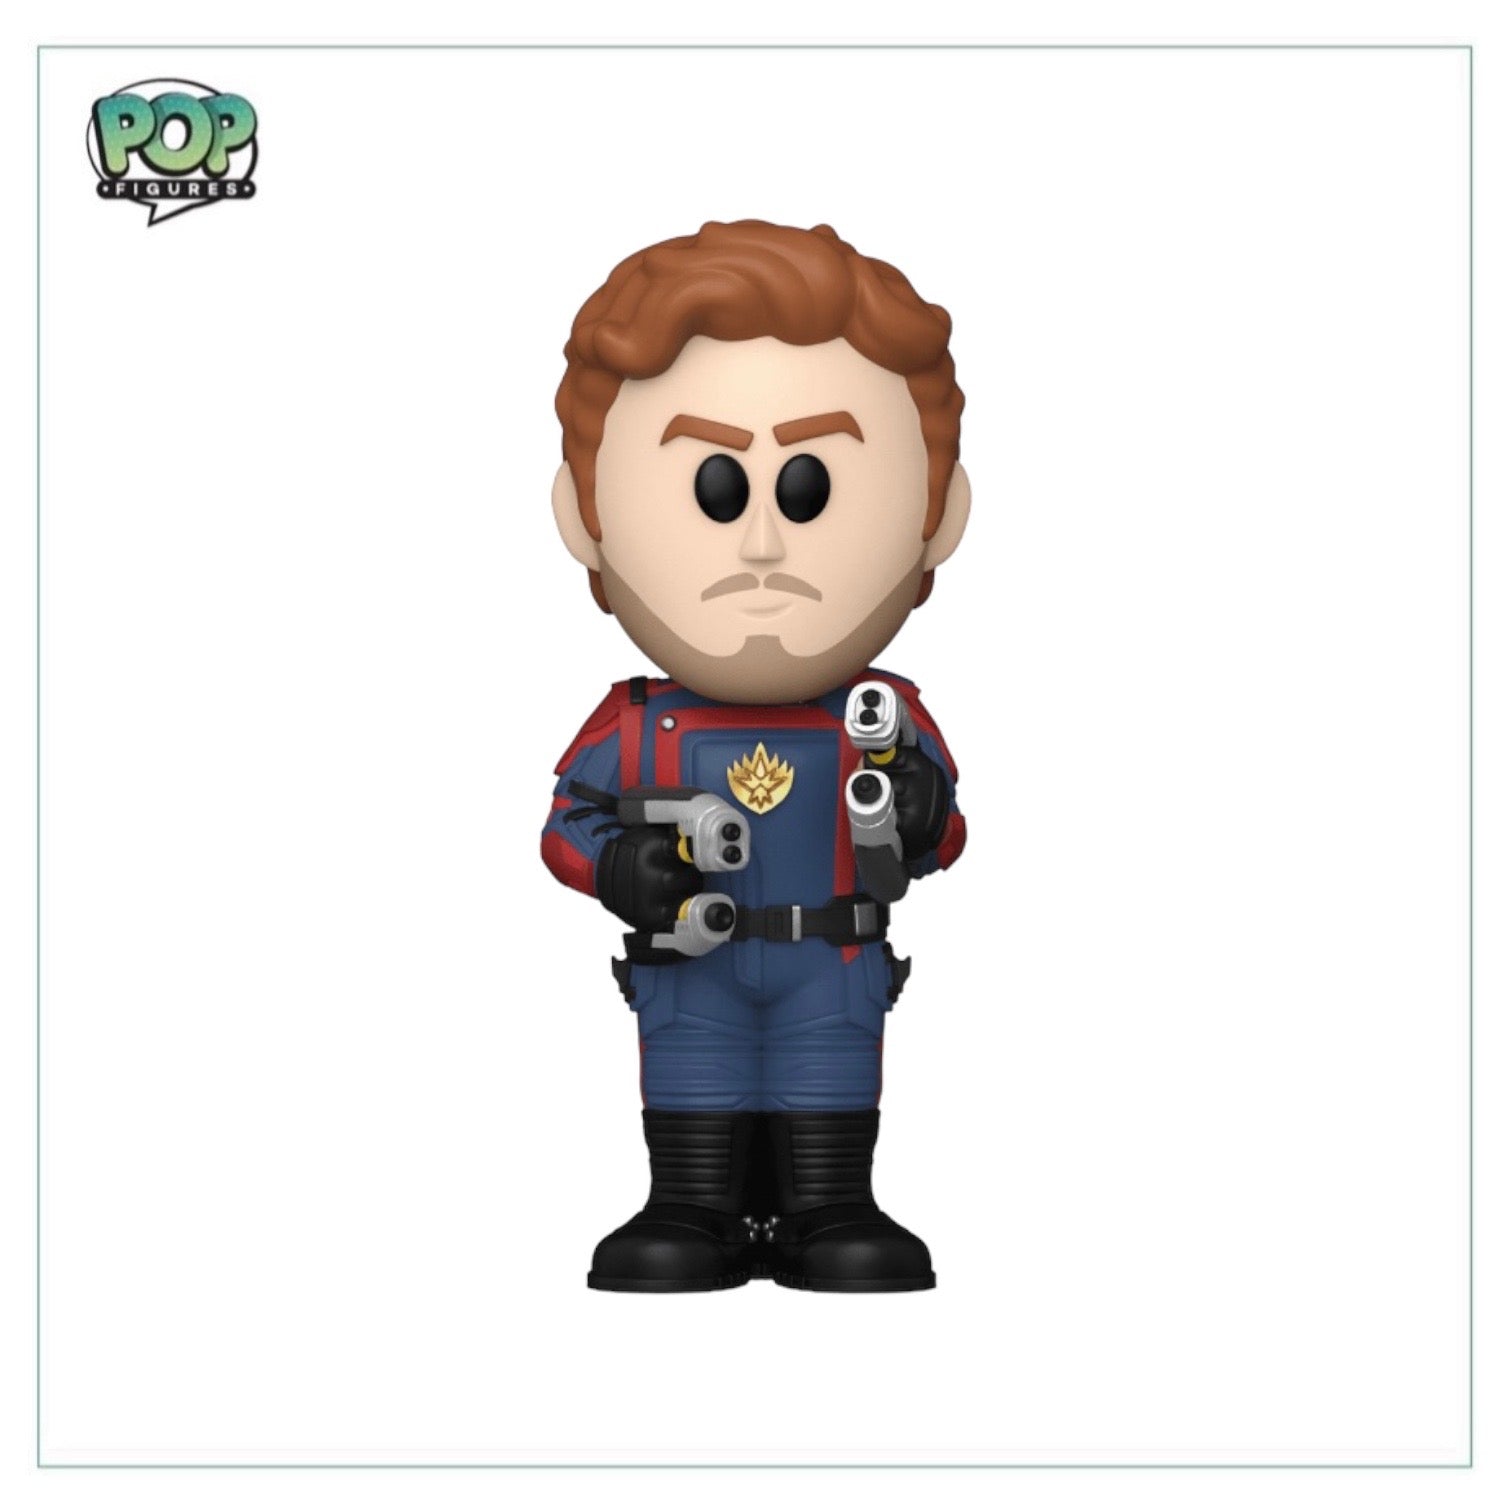 Star-Lord Funko Soda Vinyl Figure! - Guardians of The Galaxy Vol. 3 - Chance of Chase